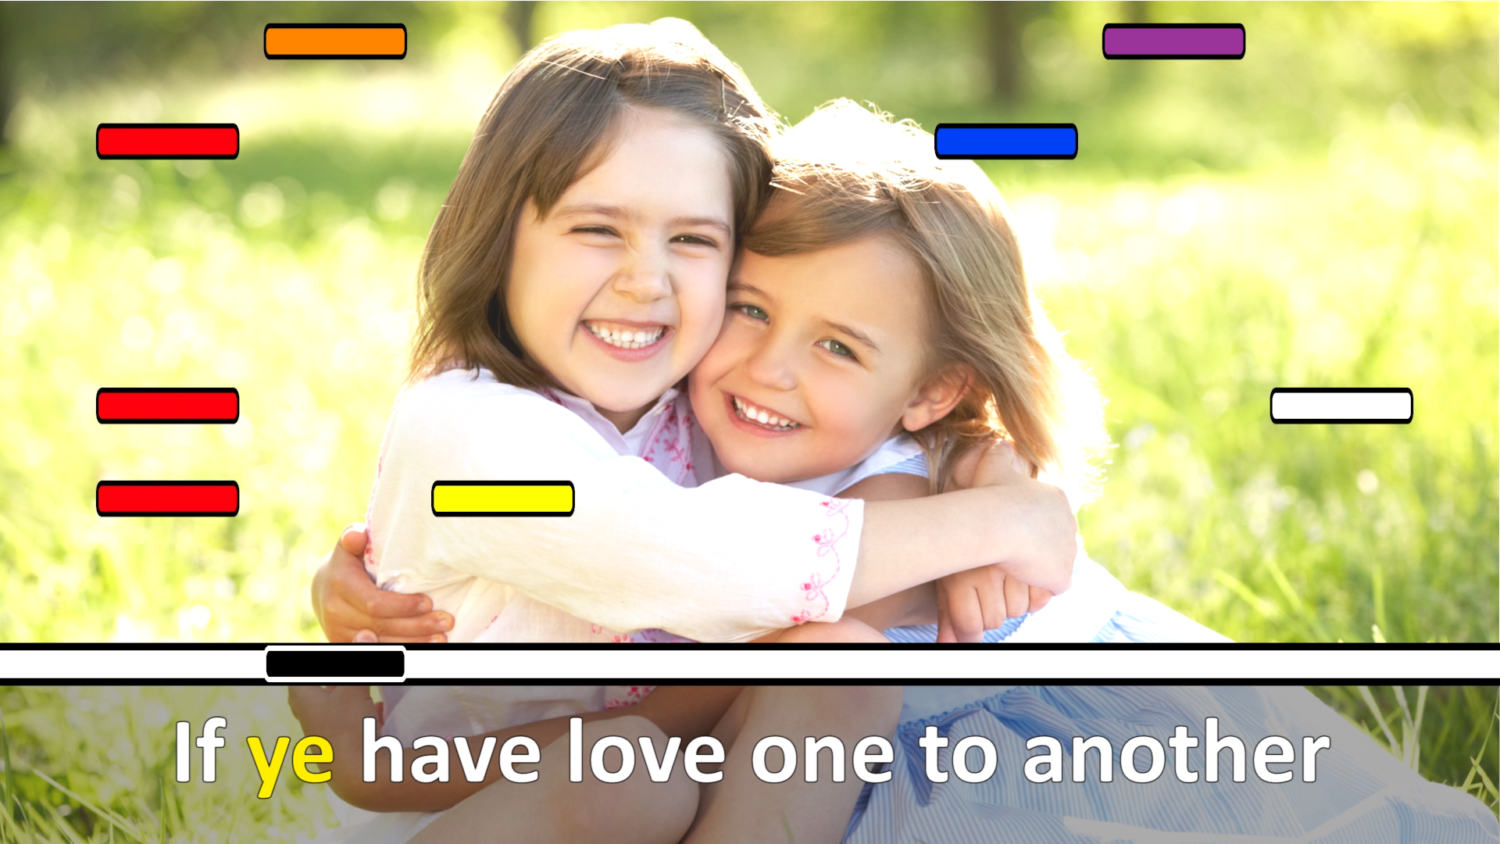 21 Love One Another Singing Time Ideas Singing time ideas for Primary Music Leaders Love One Another